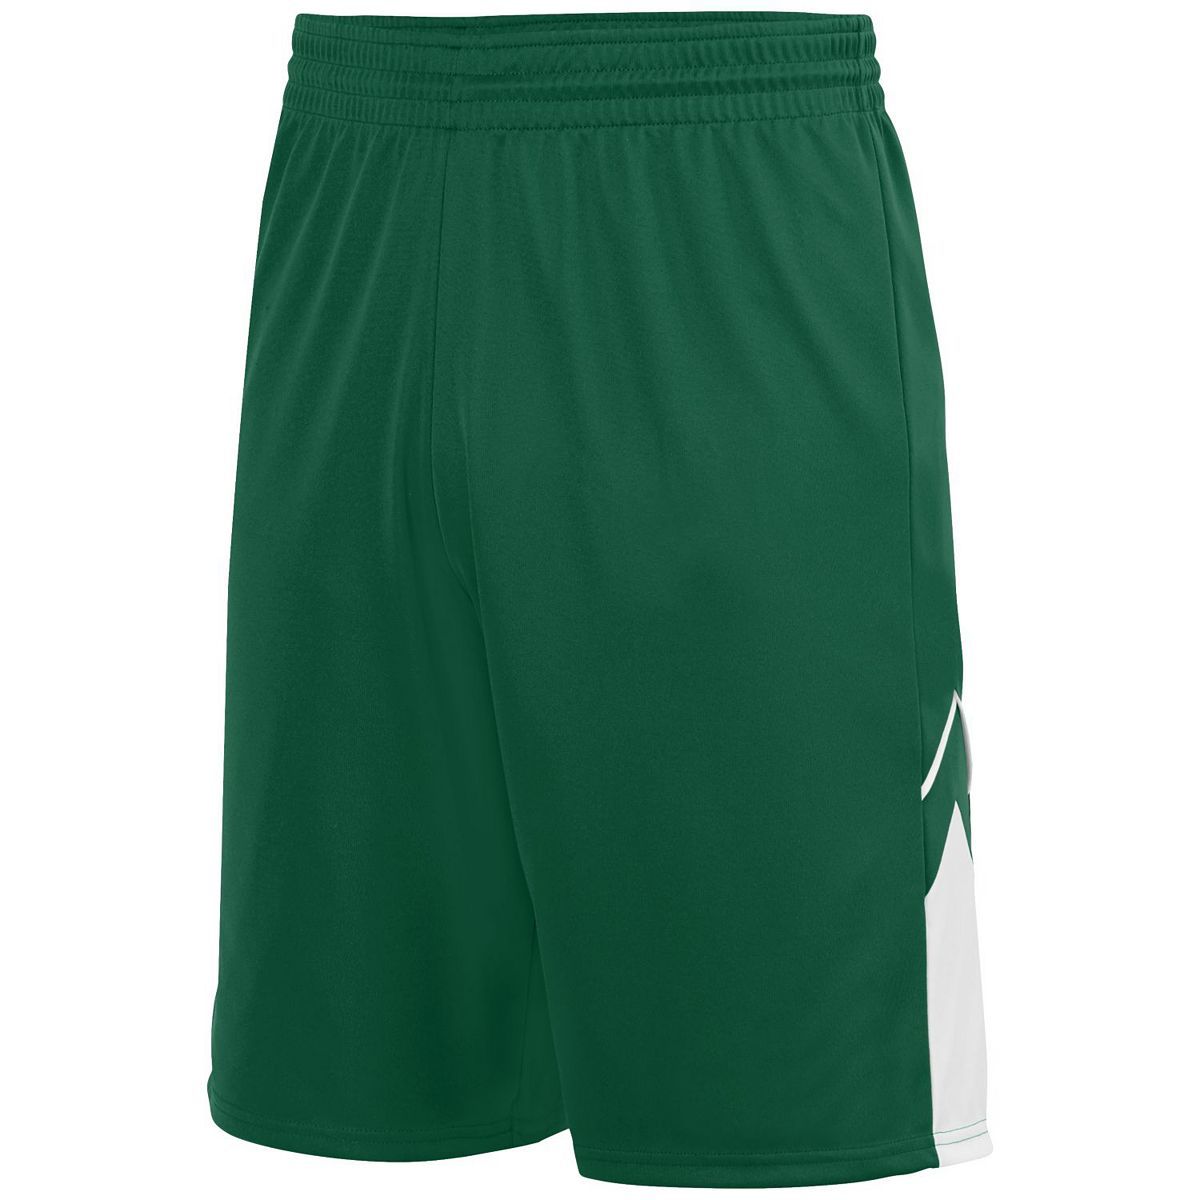 YOUTH ALLEY-OOP REVERSIBLE SHORTS from Augusta Sportswear